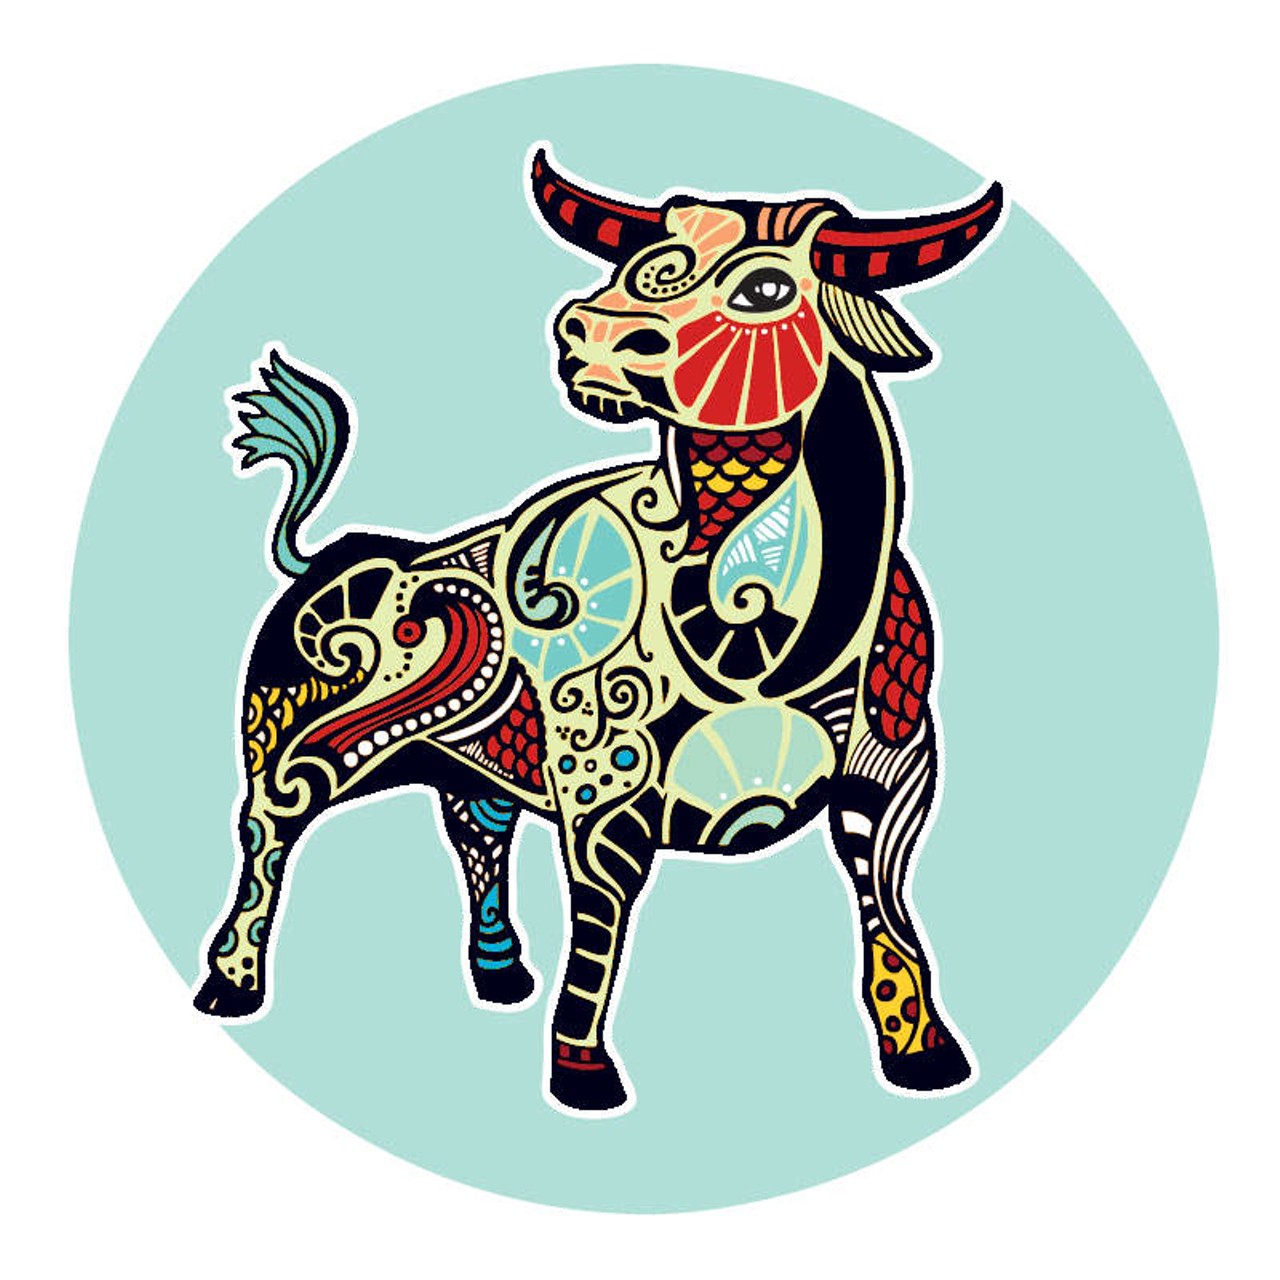 TAURUS (April 21 -May 20): 
What were you thinking? If you thought this would be easy, you&#146;re getting a taste of more than you bargained for. What you&#146;re looking at right now isn&#146;t measuring up. If you can&#146;t see the beauty in what you&#146;ve created, it&#146;s time to recharge your point of view and find the light here. It isn&#146;t your usual style to be hypercritical. Some part of you must have expected more, or expected something different. P.S.: here you are, left with what you&#146;ve got. Happiness is all about &#147;loving what is.&#148; Look for what&#146;s perfect in your situation and learn to make the best of it.